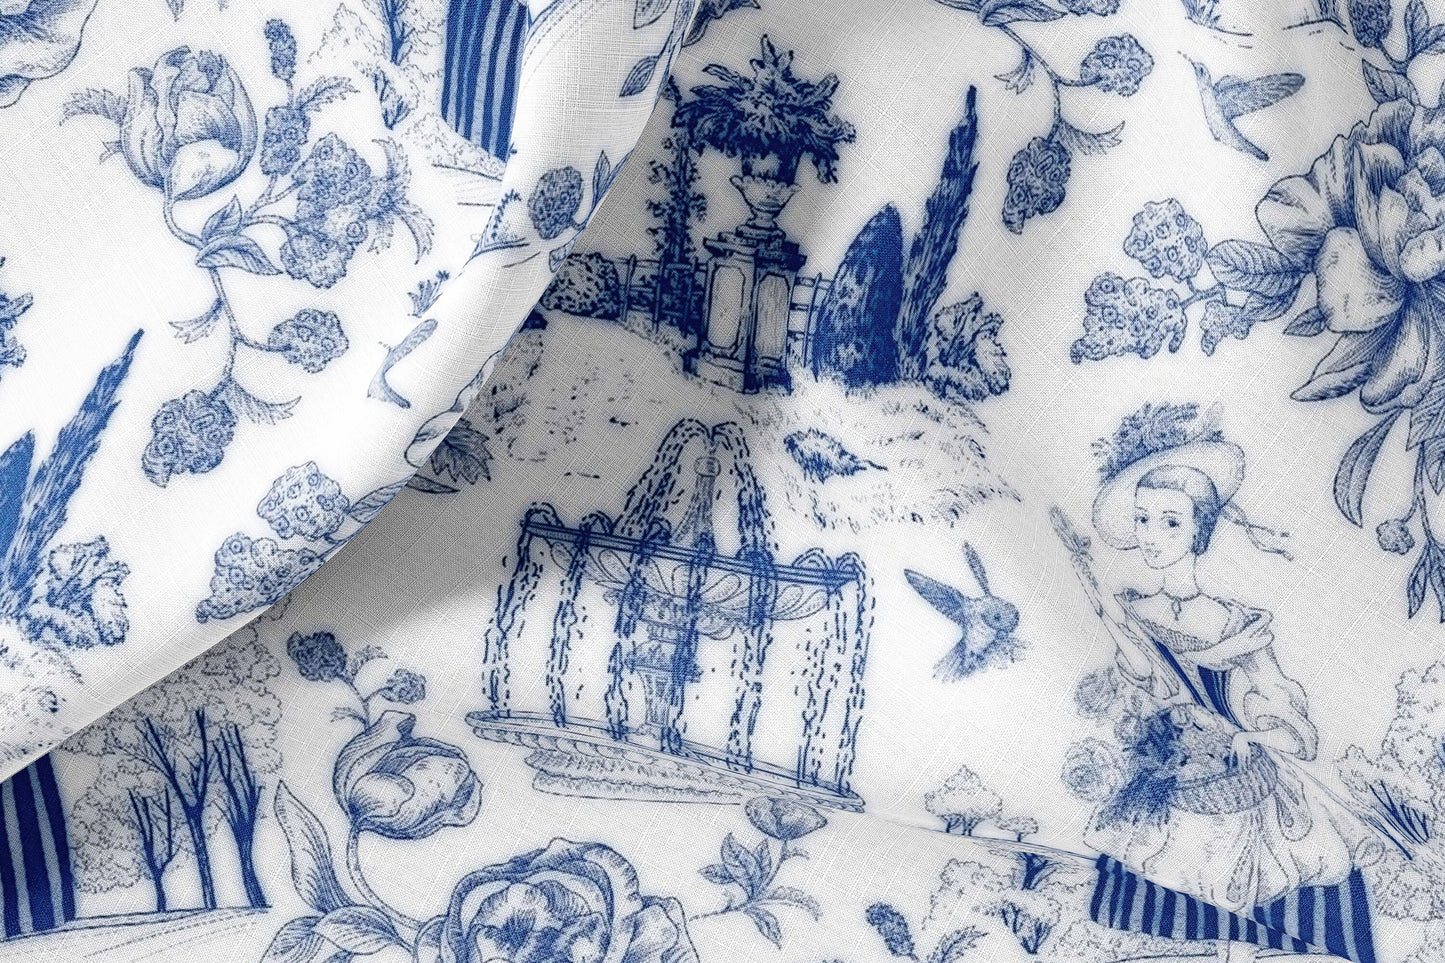 Vintage Linen By The Yard French Toile de Jouy  Print Linen Fabric For Bedding, Curtains, Dresses, Clothing, Table Cloth & Pillow Covers